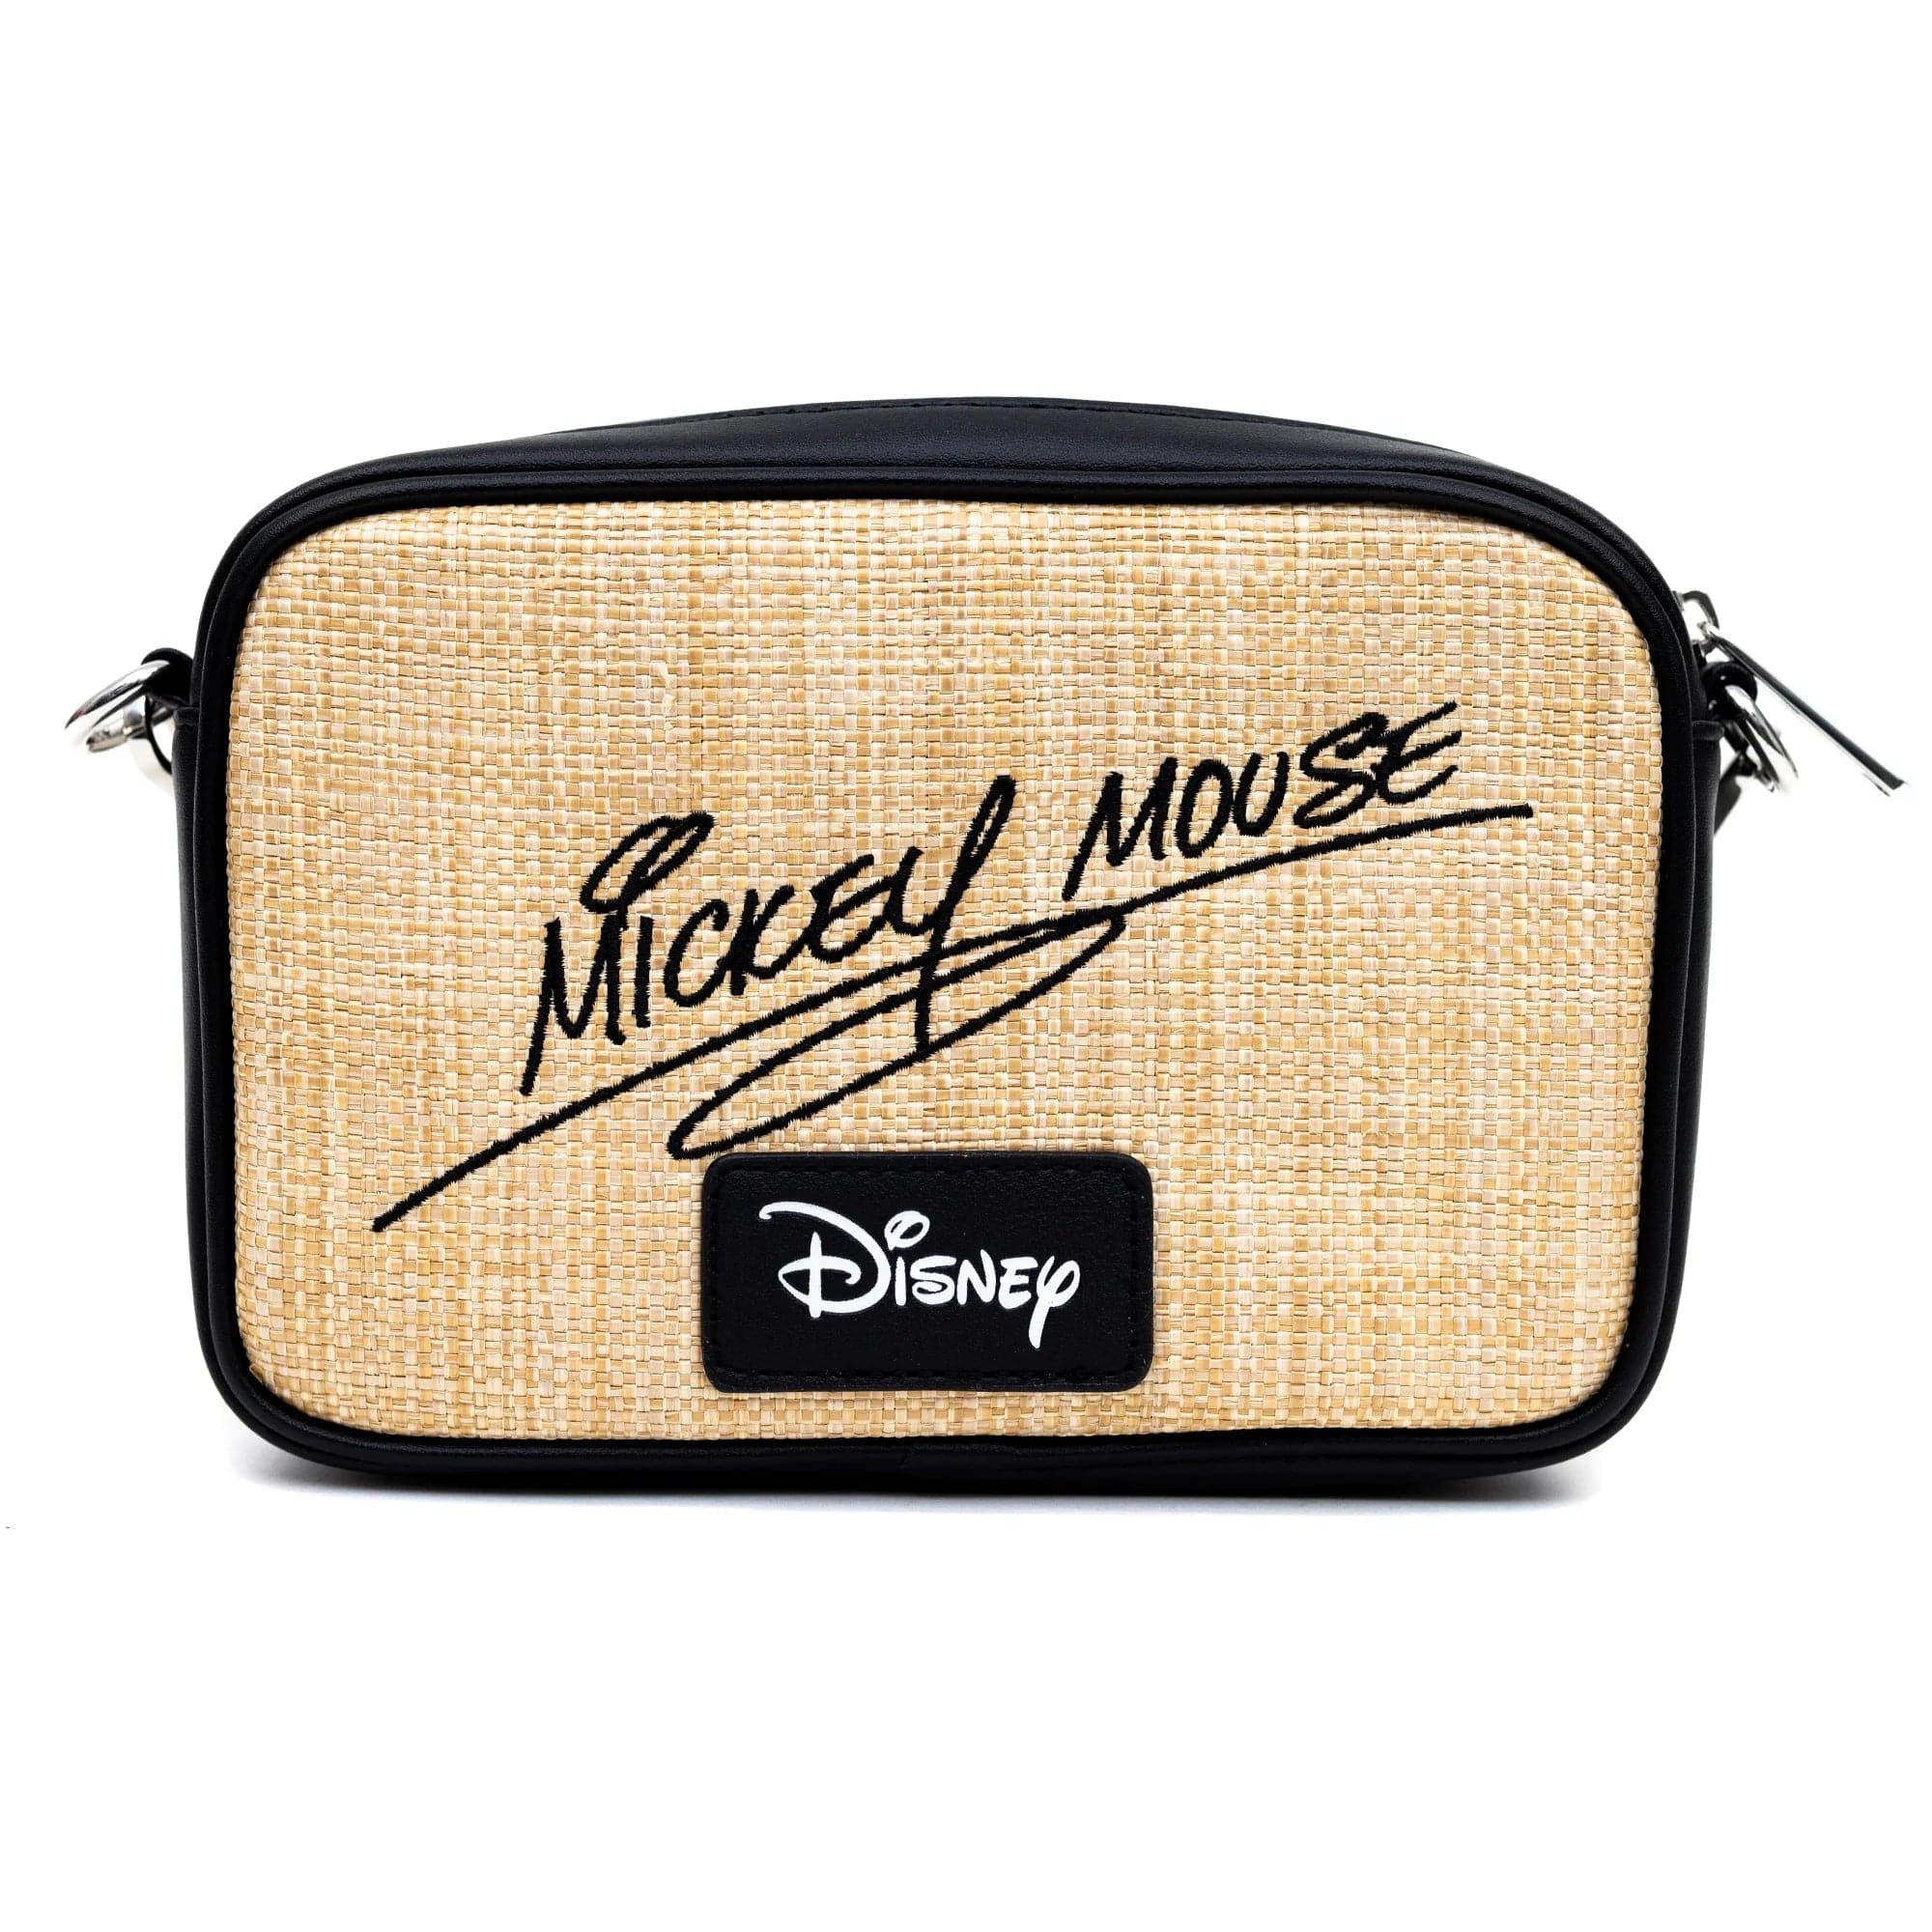 Disney Cross Body Bag for Women, Rose Gold Shoulder Bag Minnie and Mickey  Mouse, Gifts for Women (Red): Amazon.co.uk: Fashion